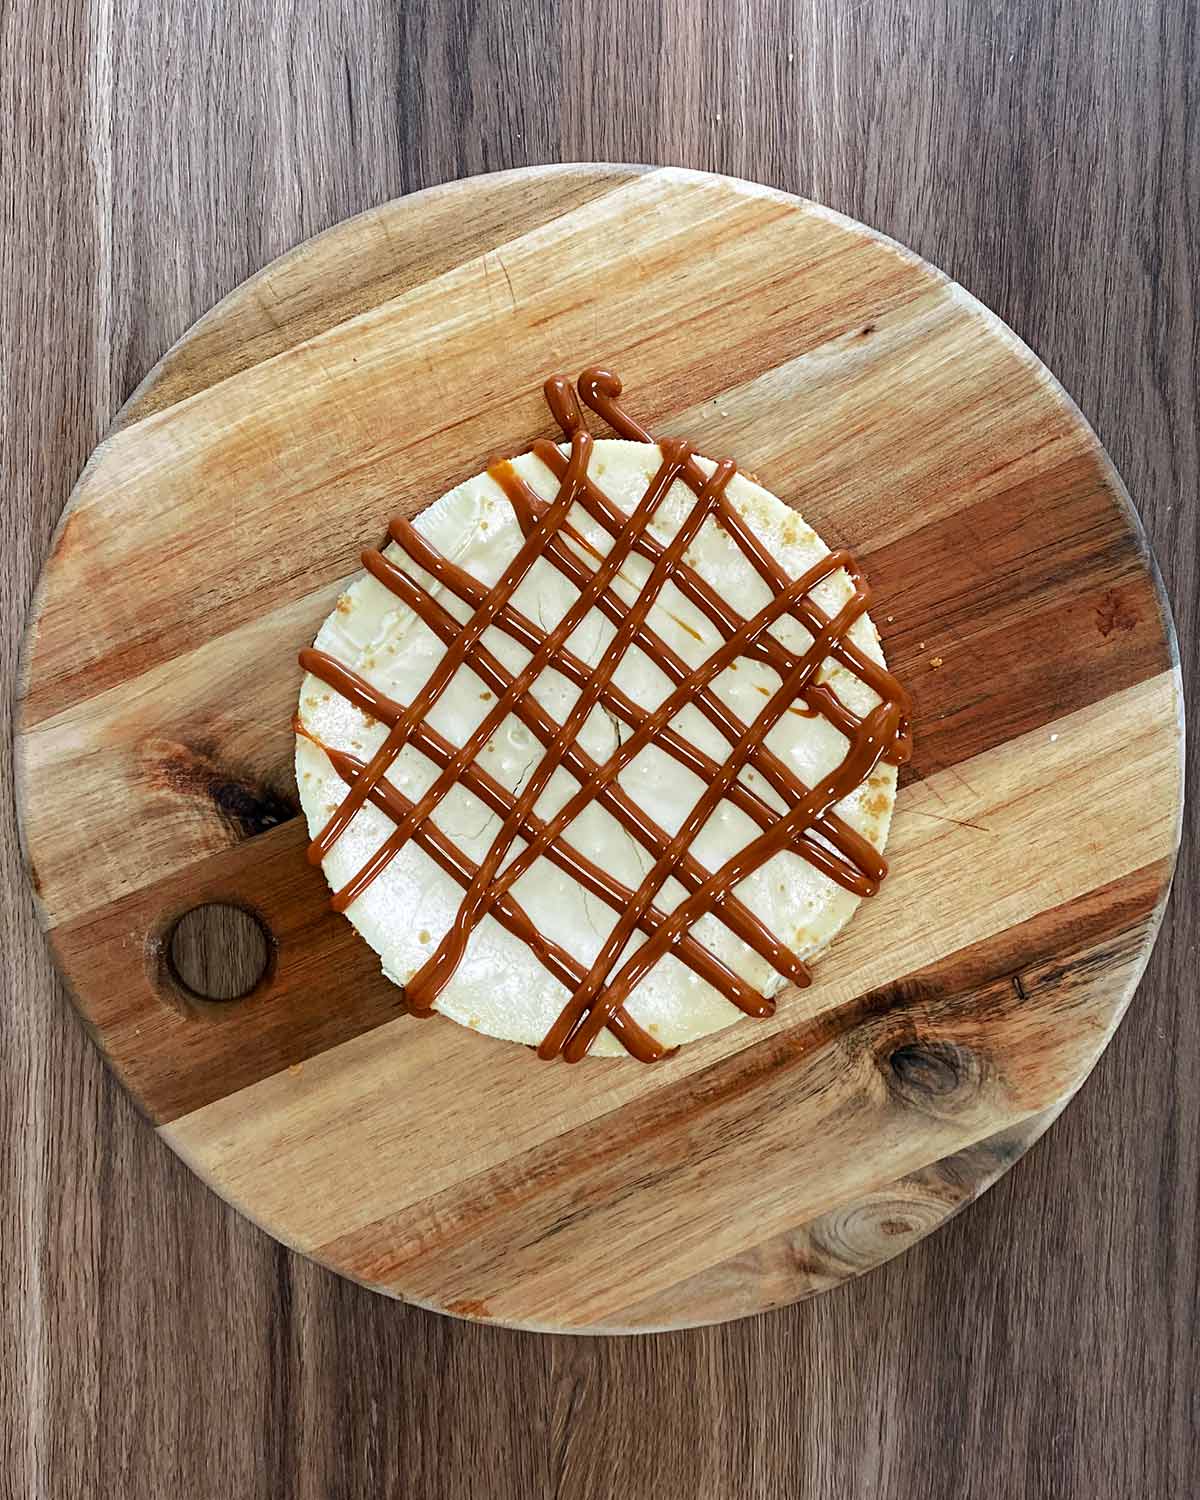 A cheesecake with a criss cross of caramel sauce over it.